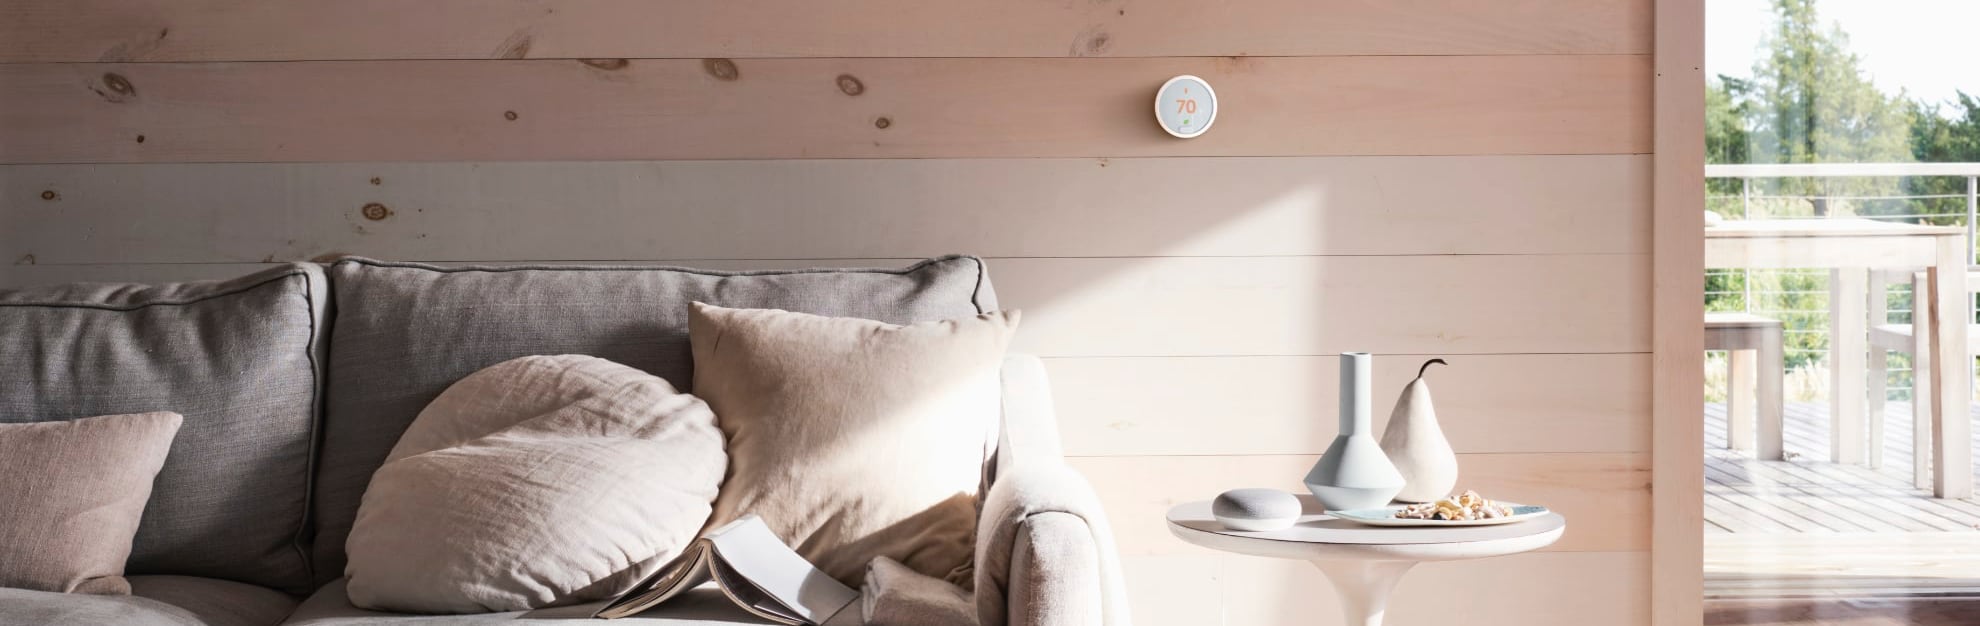 Vivint Home Automation in Johnson City